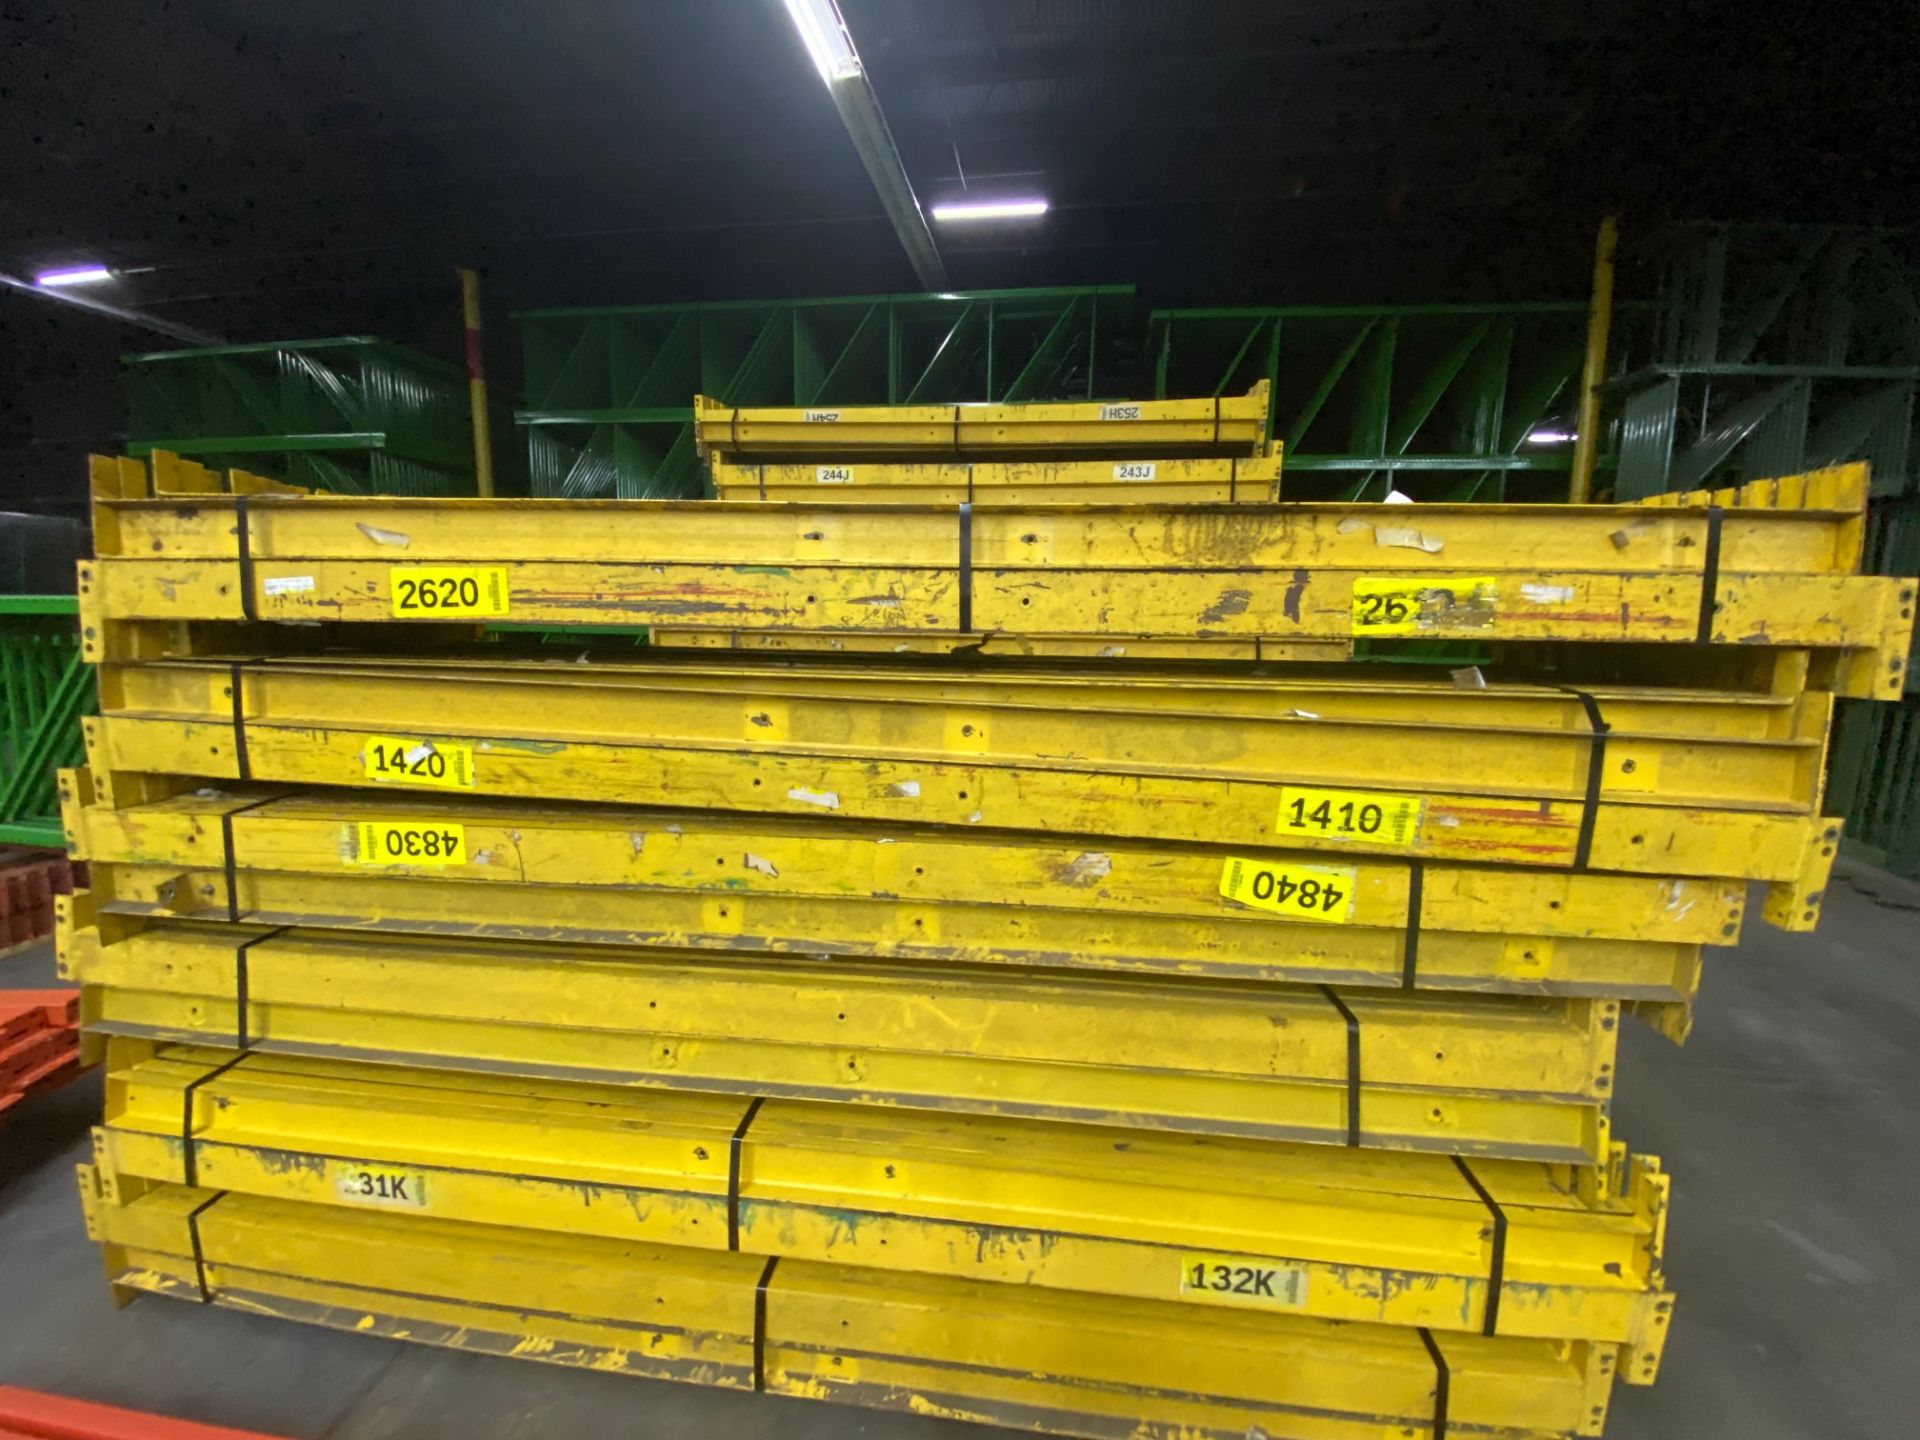 14 BAYS OF STRUCTURAL STYLE PALLET RACKS - 14 BAYS X 1 LINES X 30'H X 36"D X 112"W - Image 3 of 4